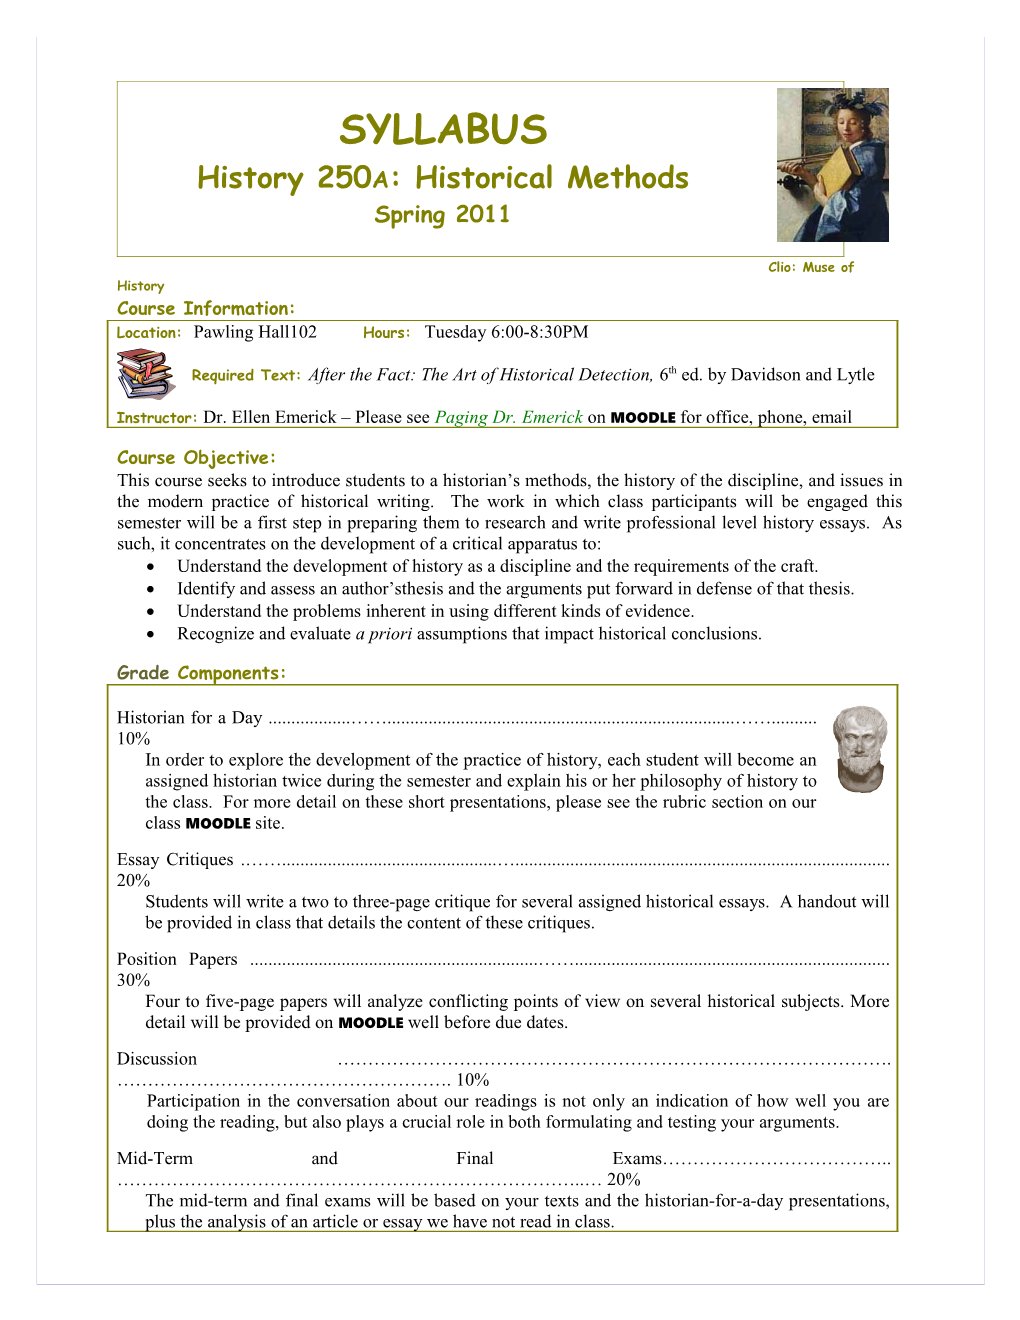 History 250A: Historical Methods